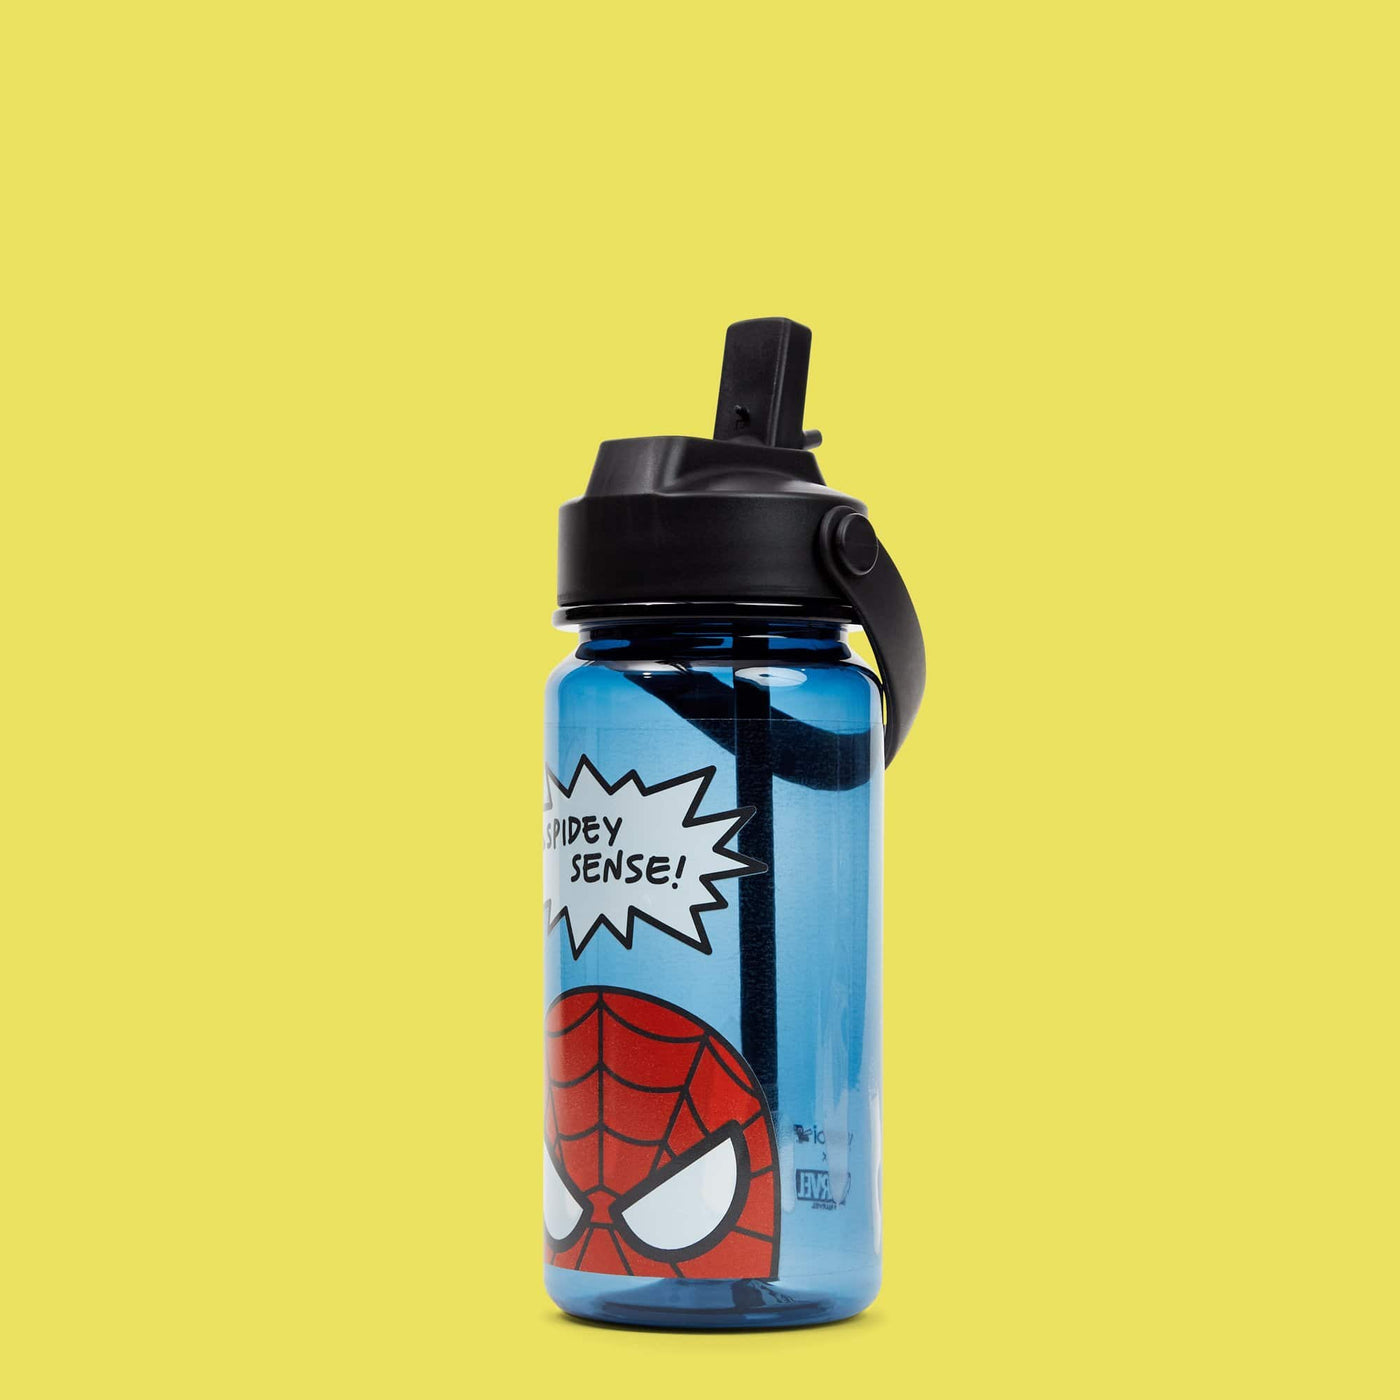 blue water bottle with red cartoon Spider-Man face and speech bubble that says "Spidey Sense!" showing pop up drinking spout 